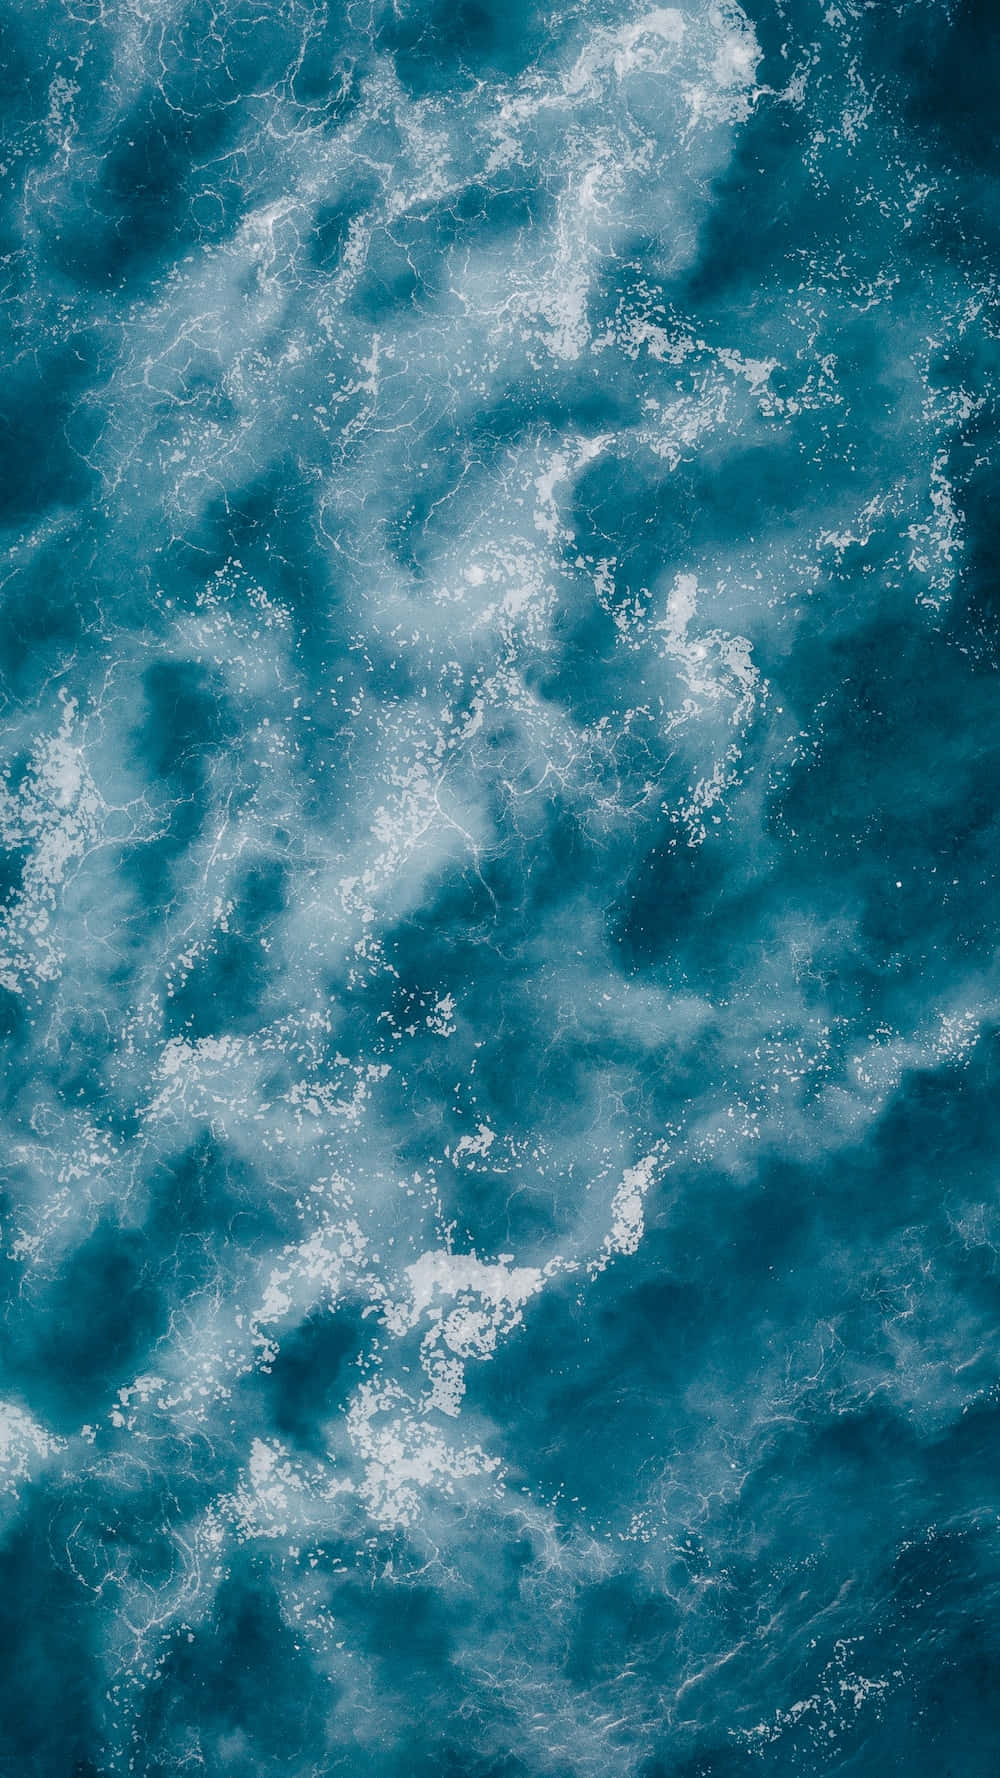 A Blue Ocean With Waves